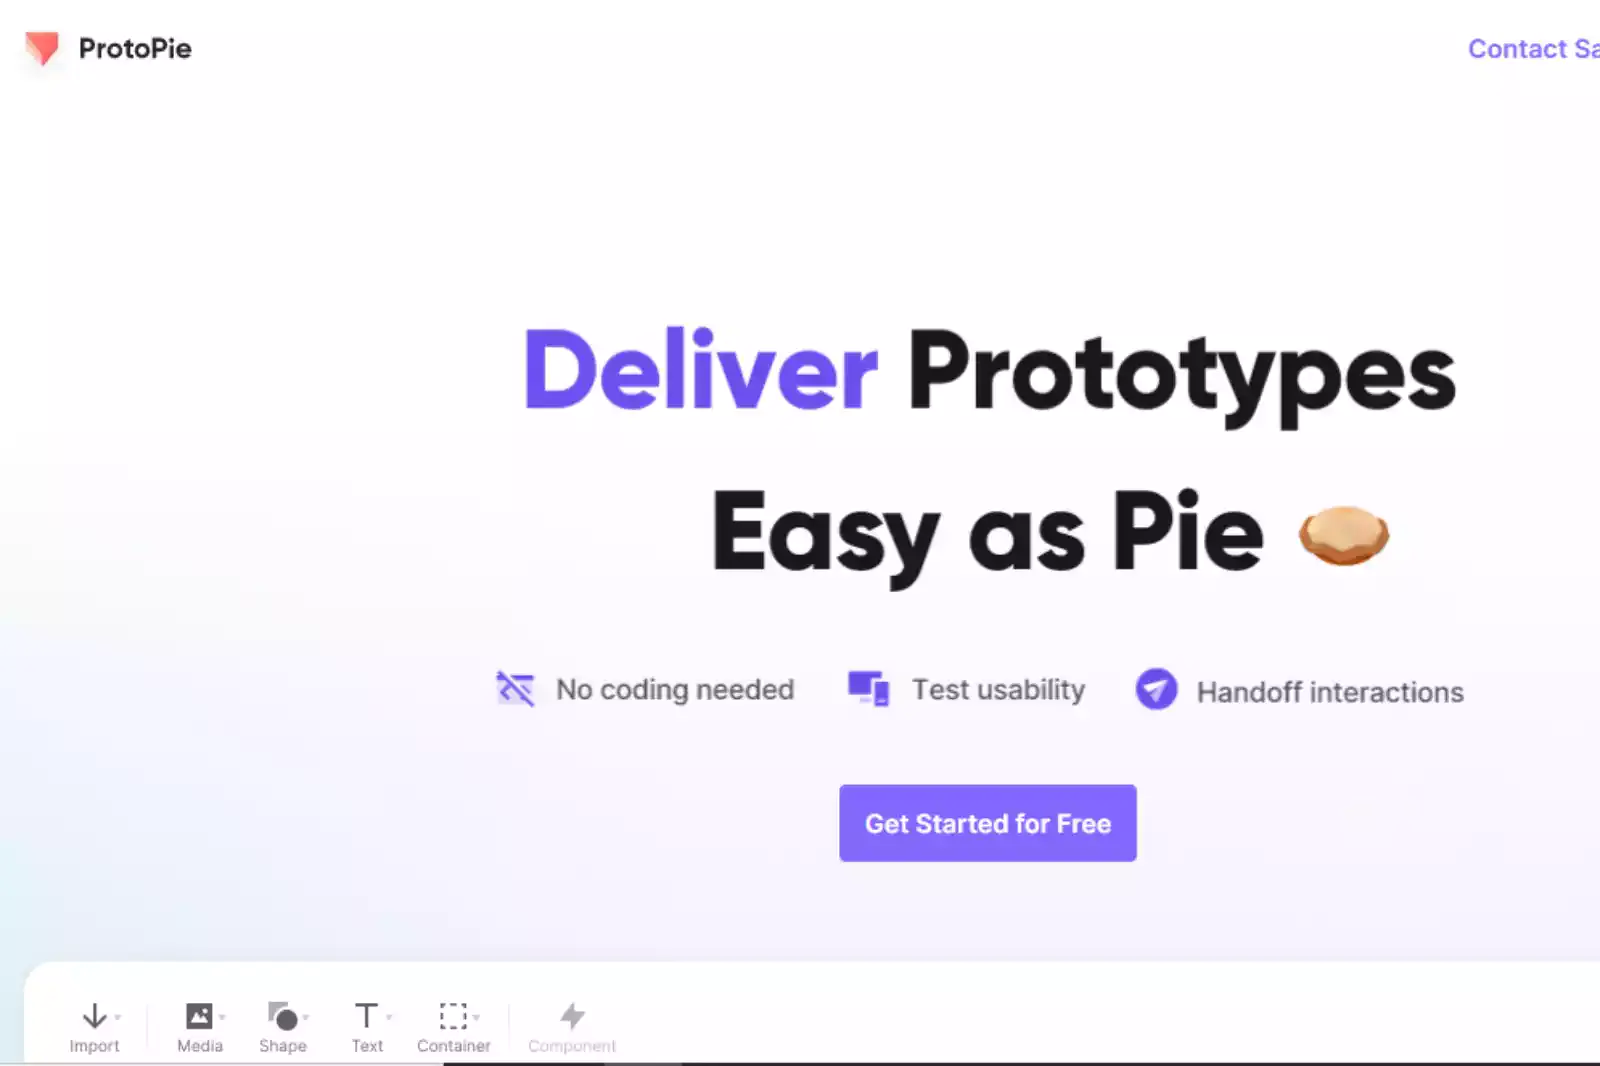 Home Page of Protopie page 